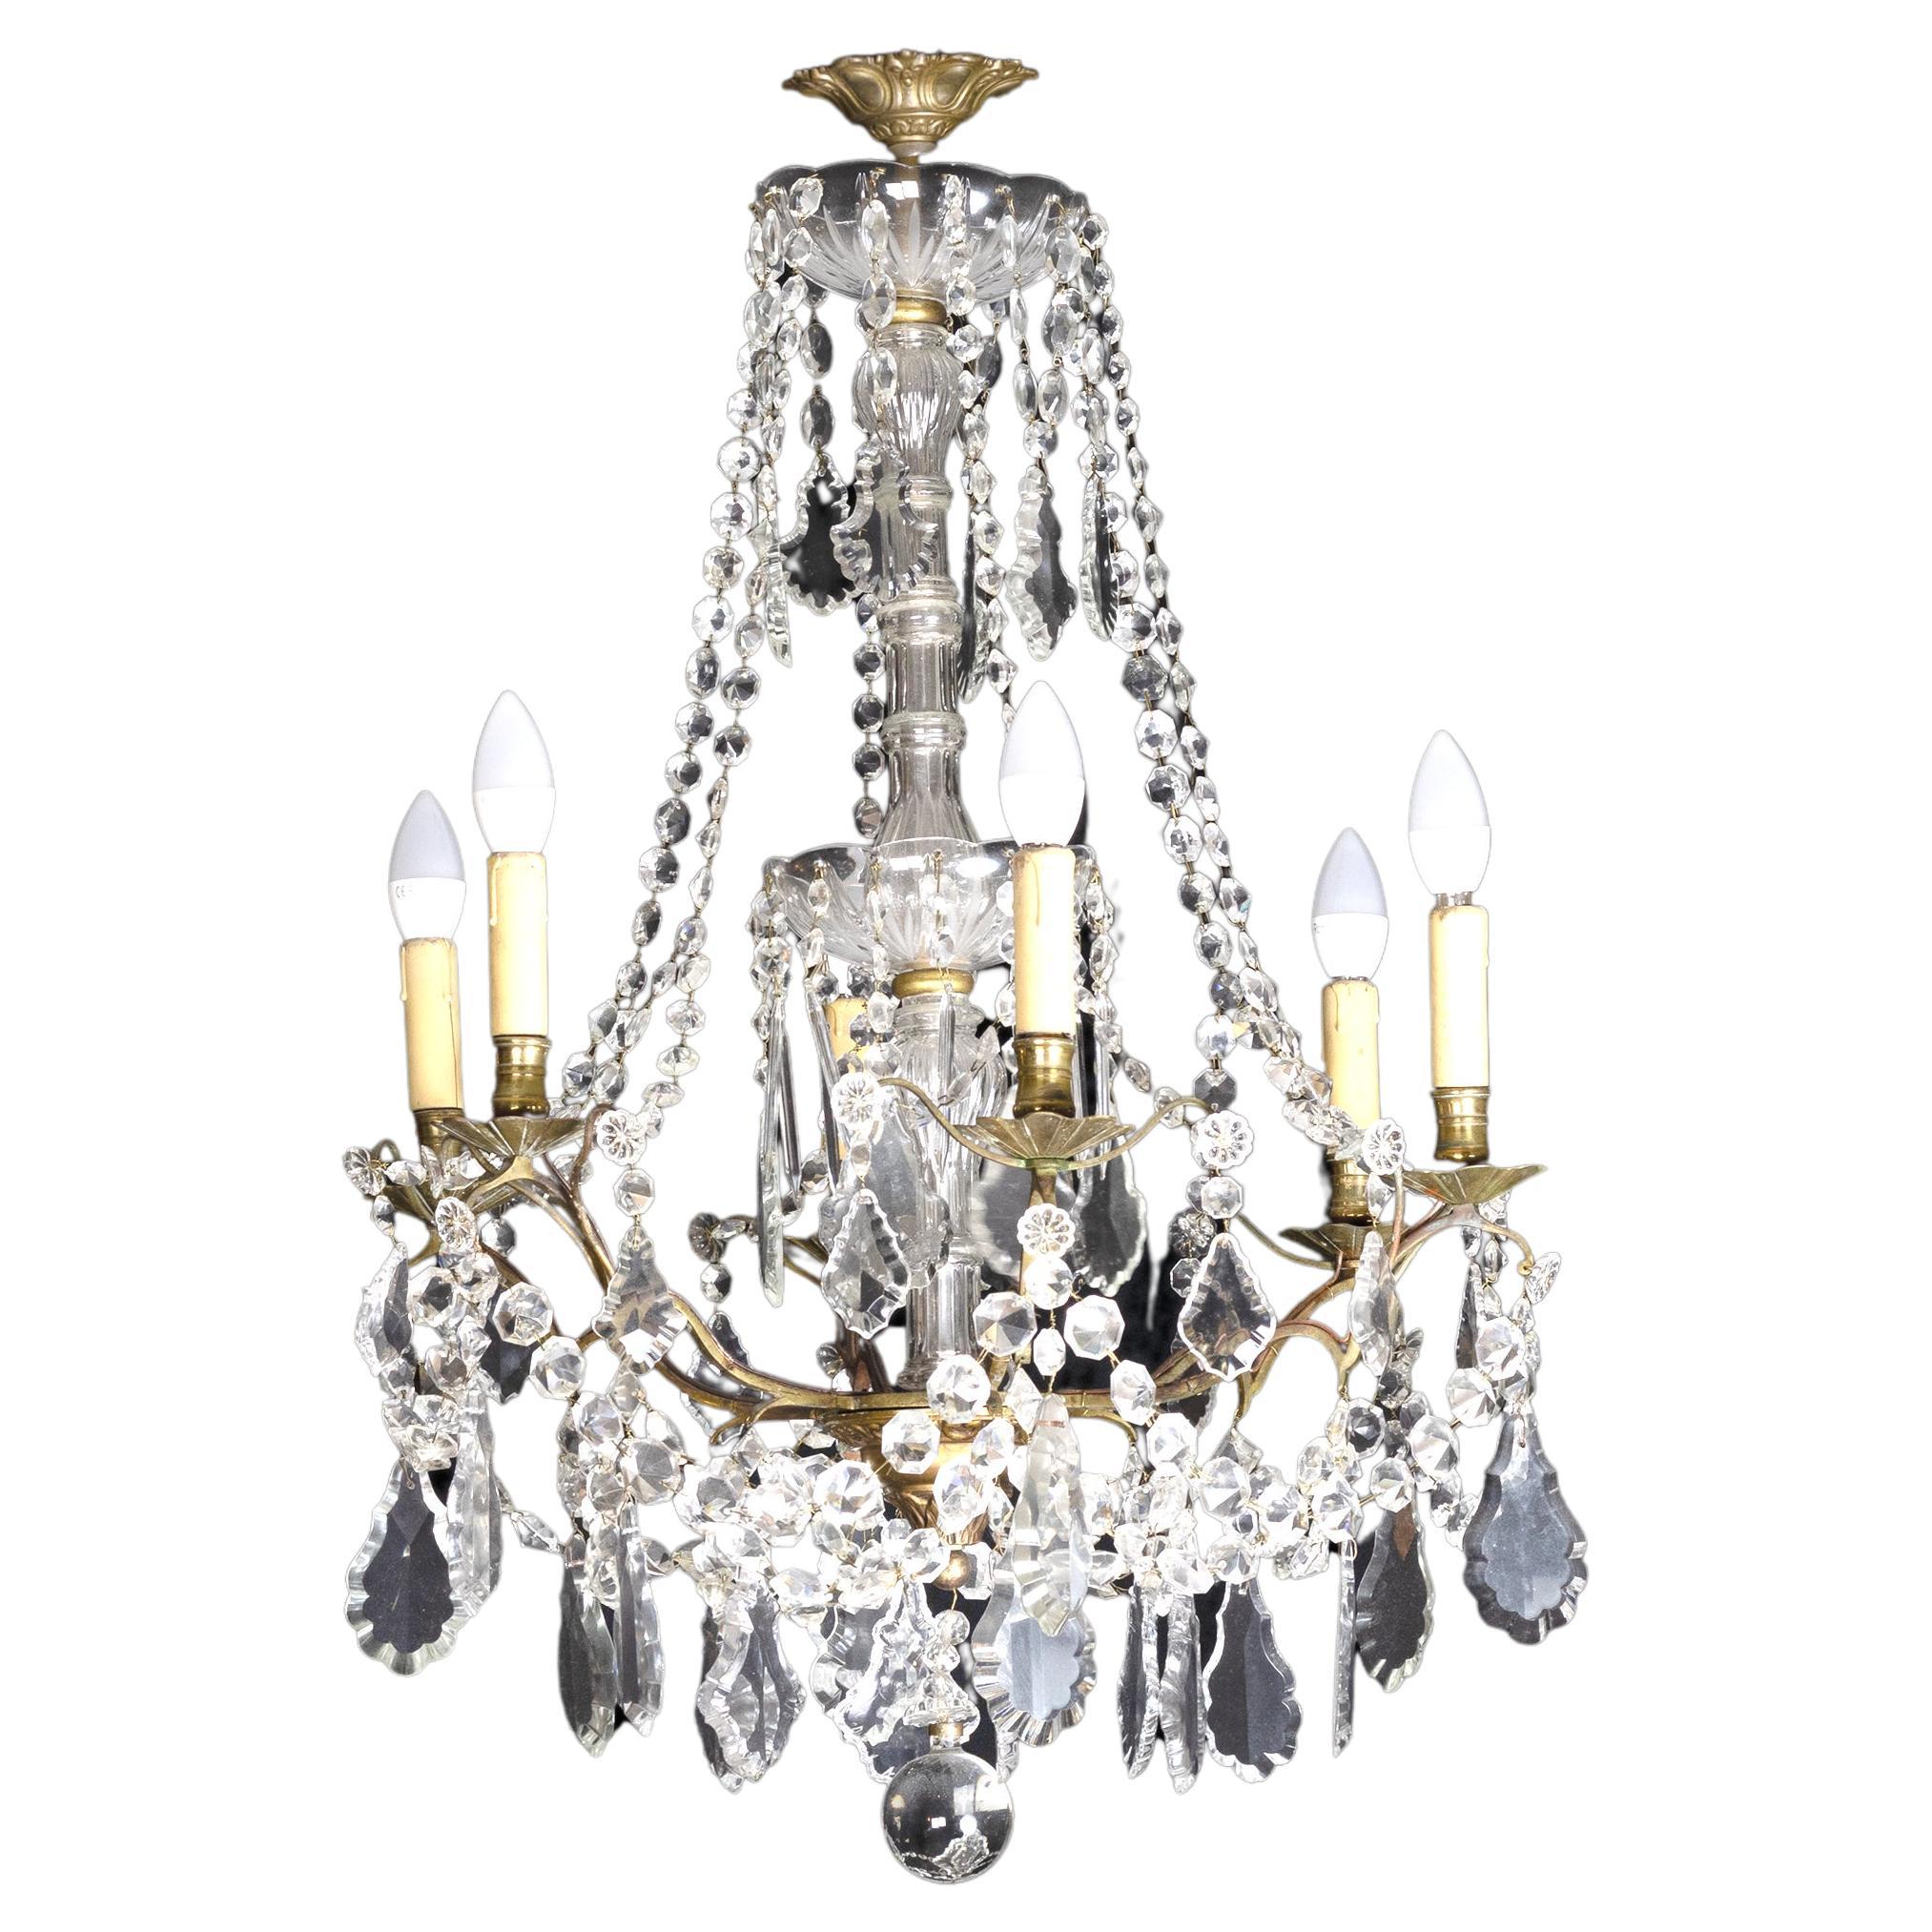 Maria Thereza Style Six Arms Glass Chandelier, 20th Century